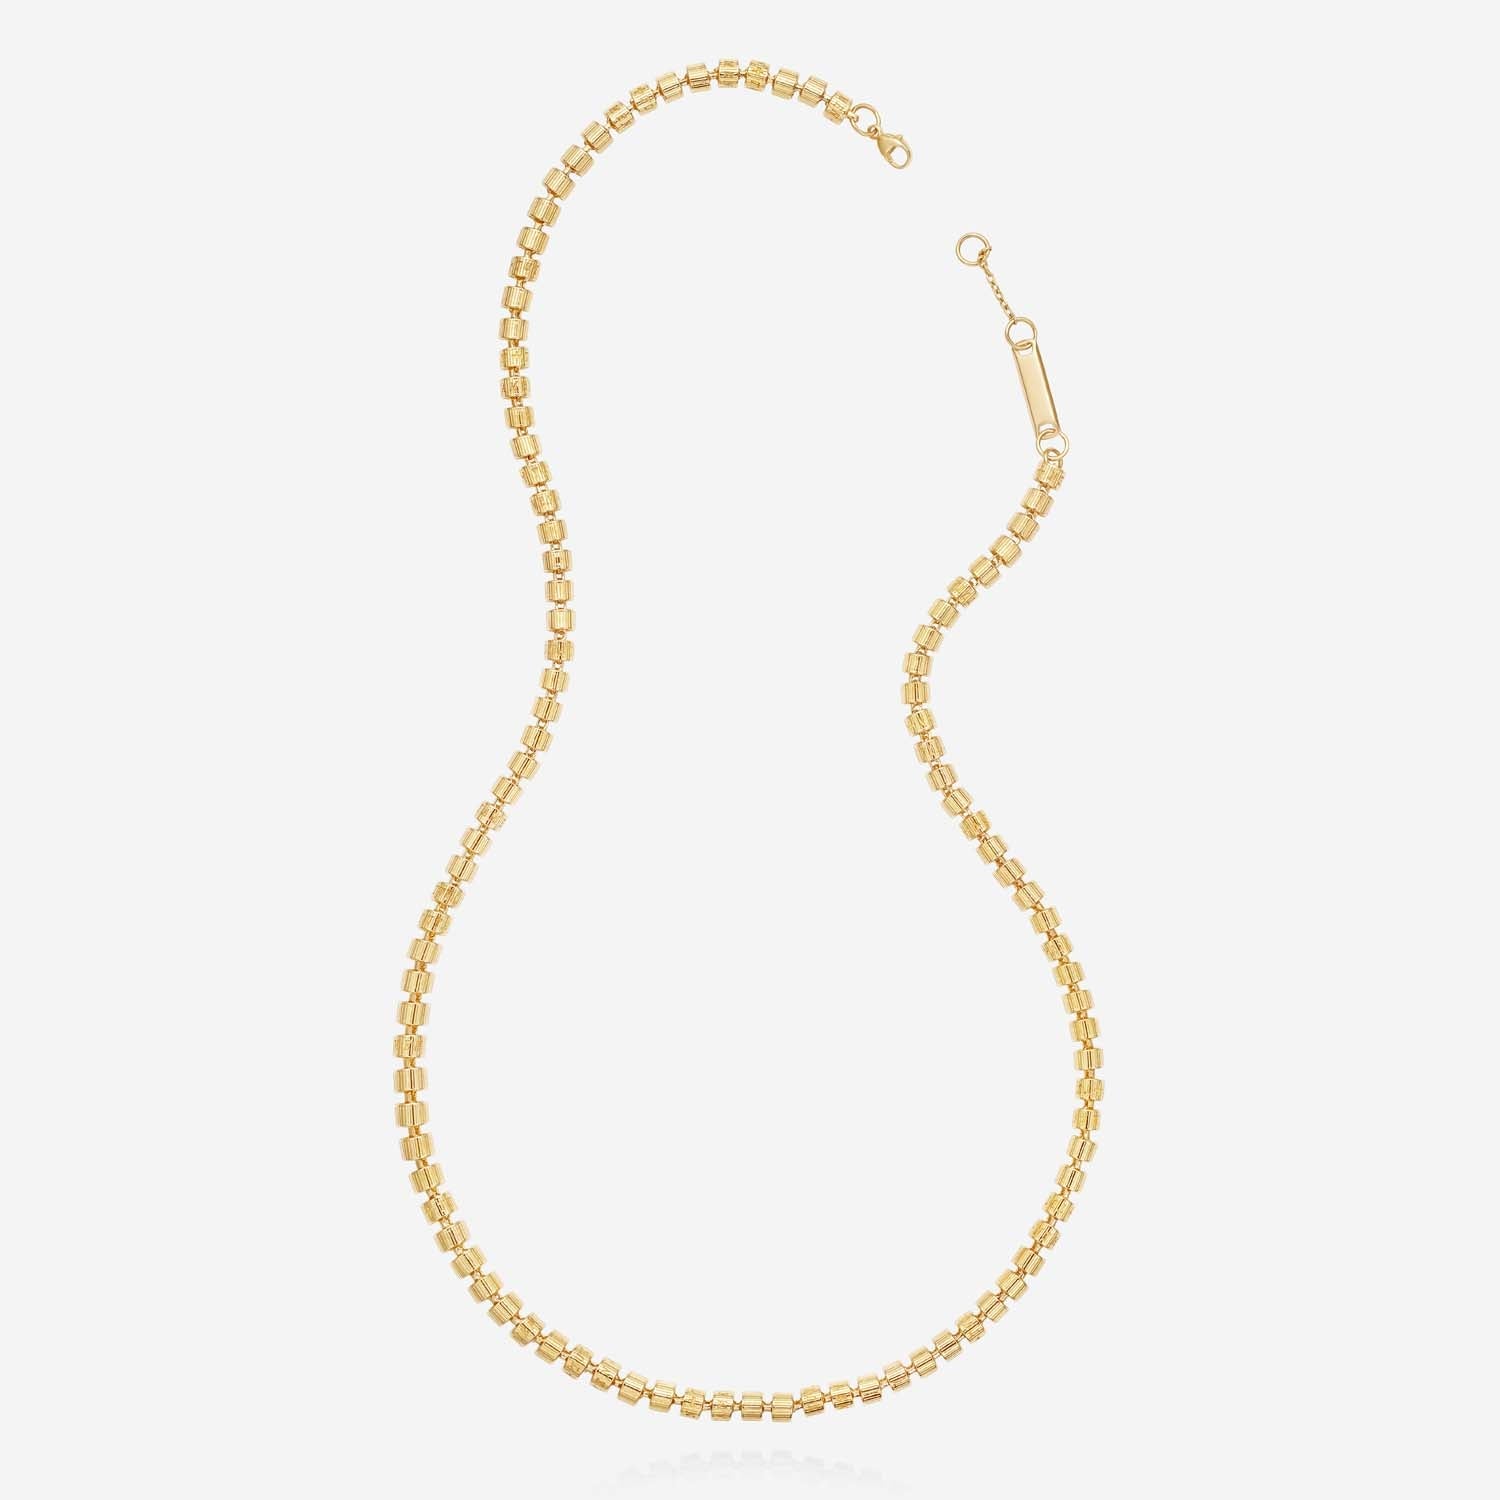 886 Royal Mint Necklaces Tutamen Stack Necklace 18ct Yellow Gold